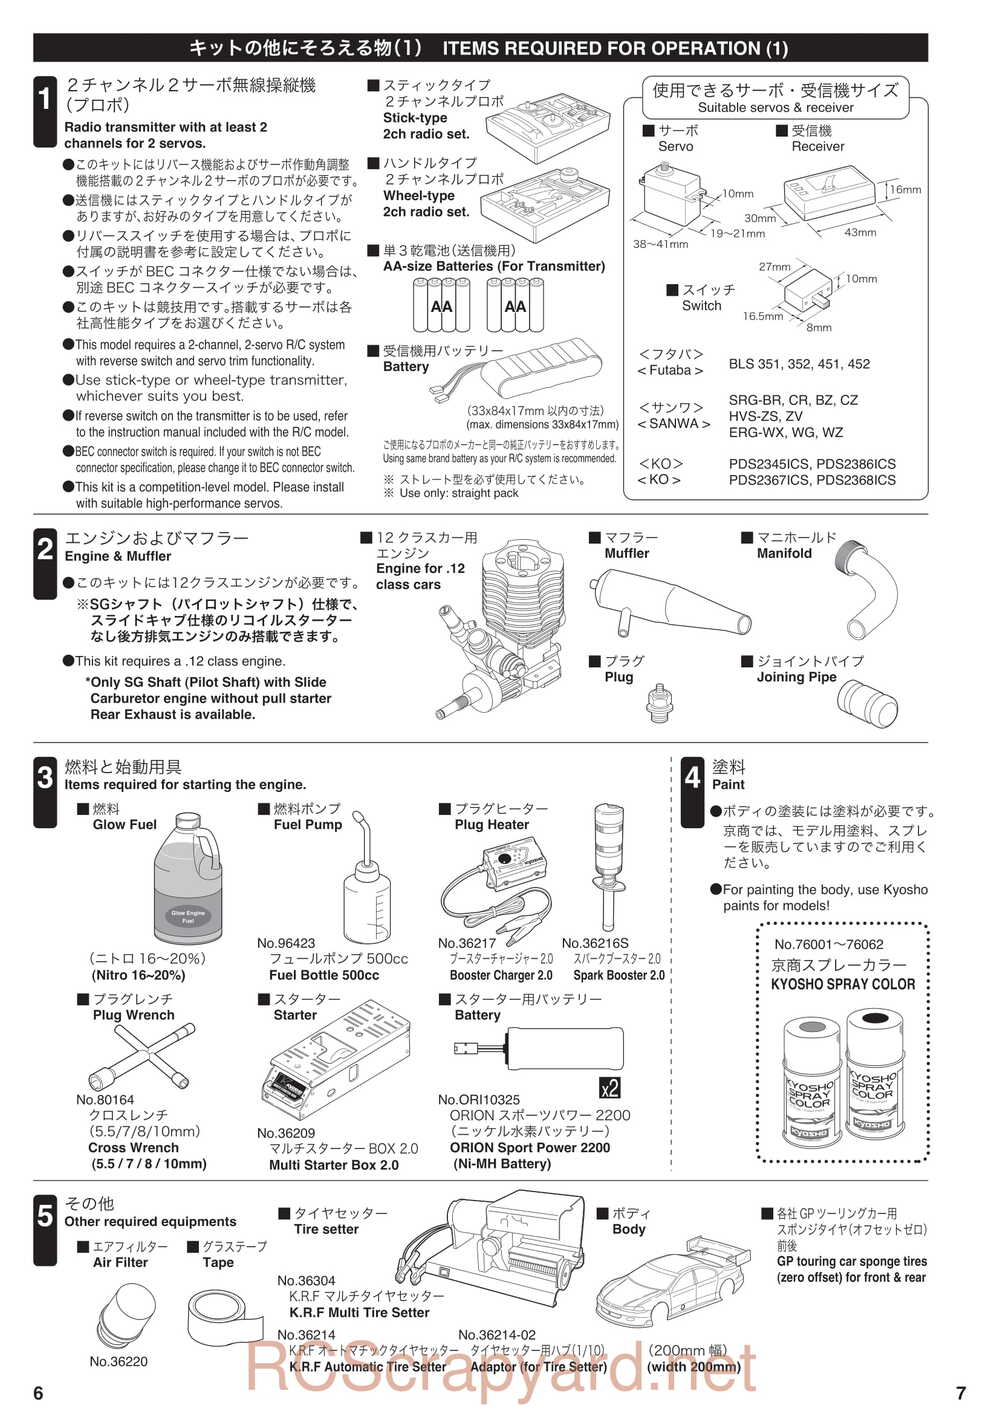 Kyosho - 31265 - V-ONE-R4 - Manual - Page 06